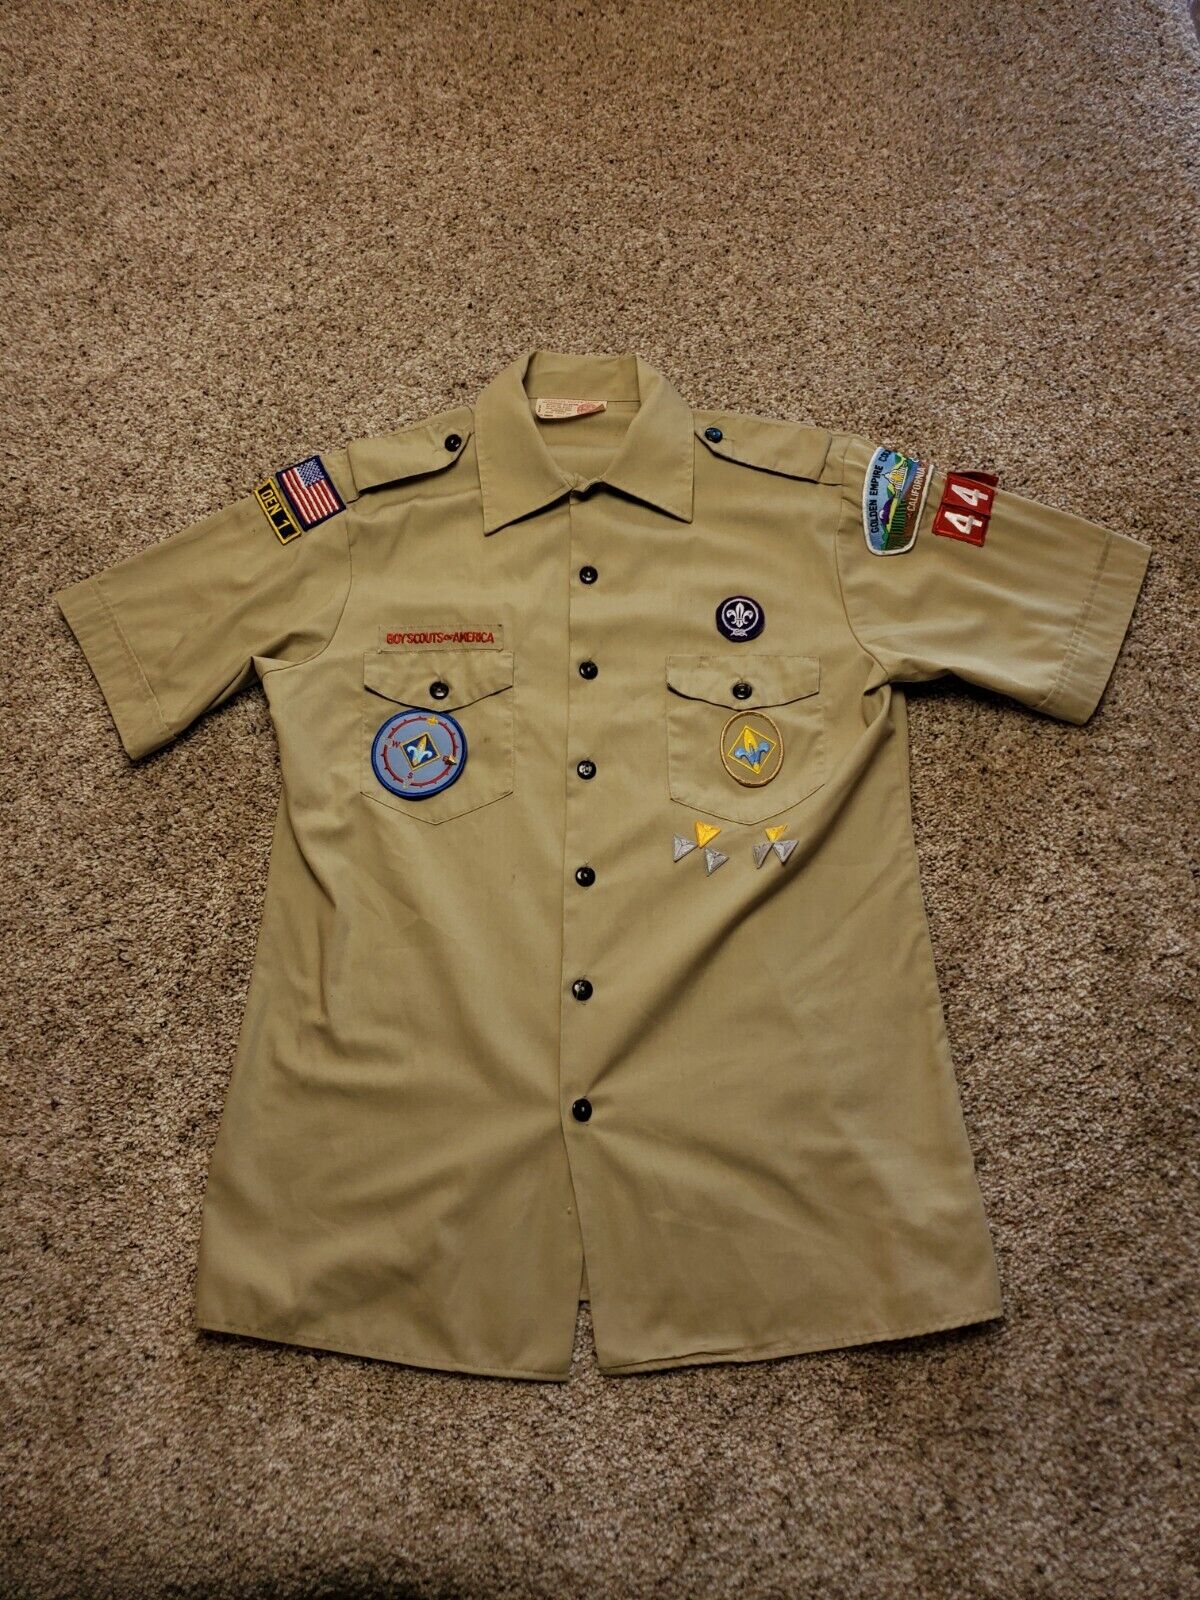 Vintage Boy Scouts Of America Official Shirt XL Youth Browm Button Up USA Made 